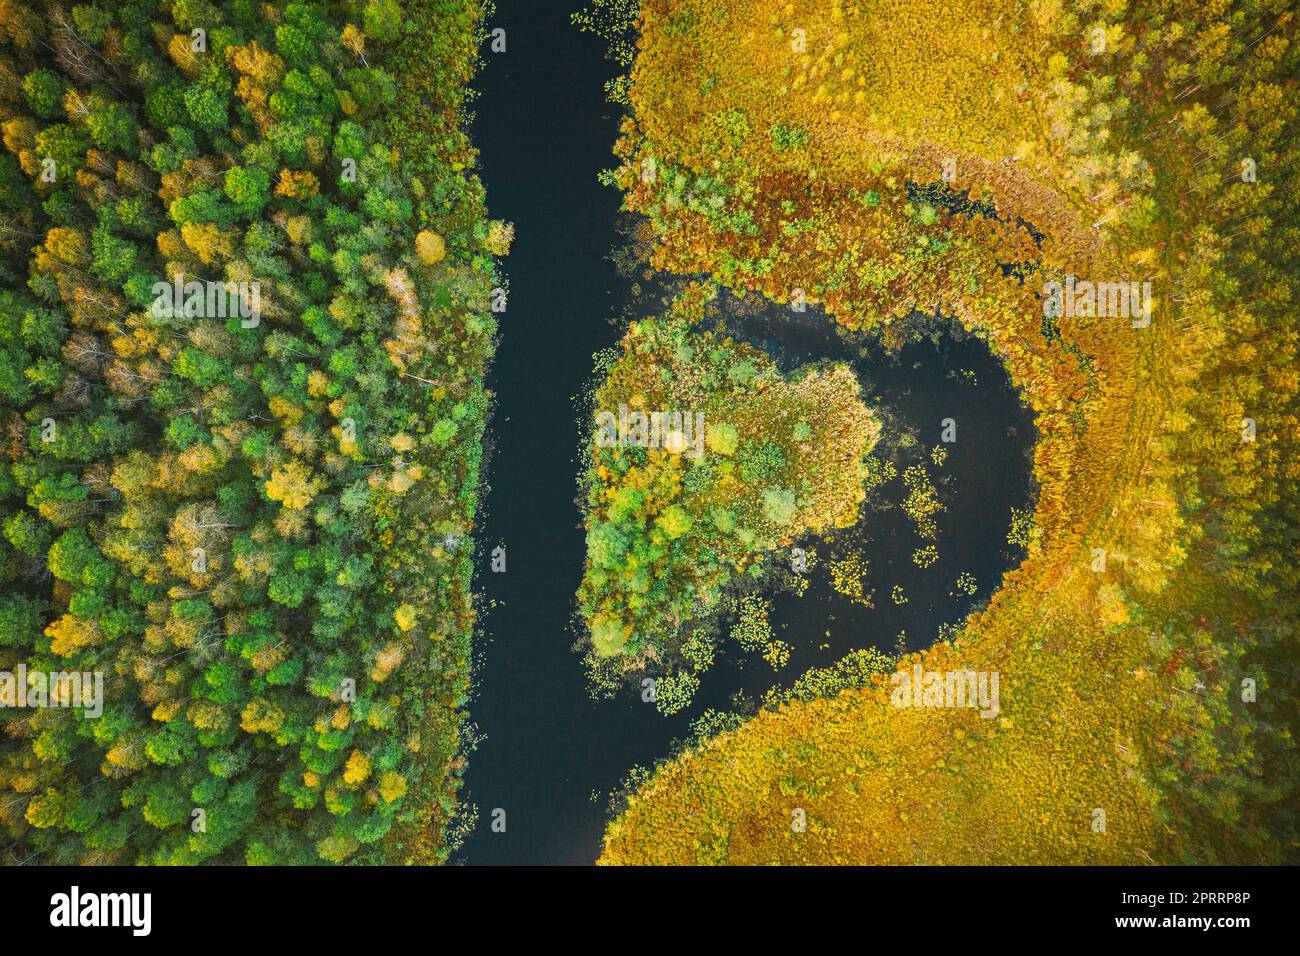 Aerial View Of Summer Curved River And Natural Island In Heart Shape. Landscape In Autumn Evening. Top View Of Beautiful Nature From High Attitude In Summer Season Stock Photo